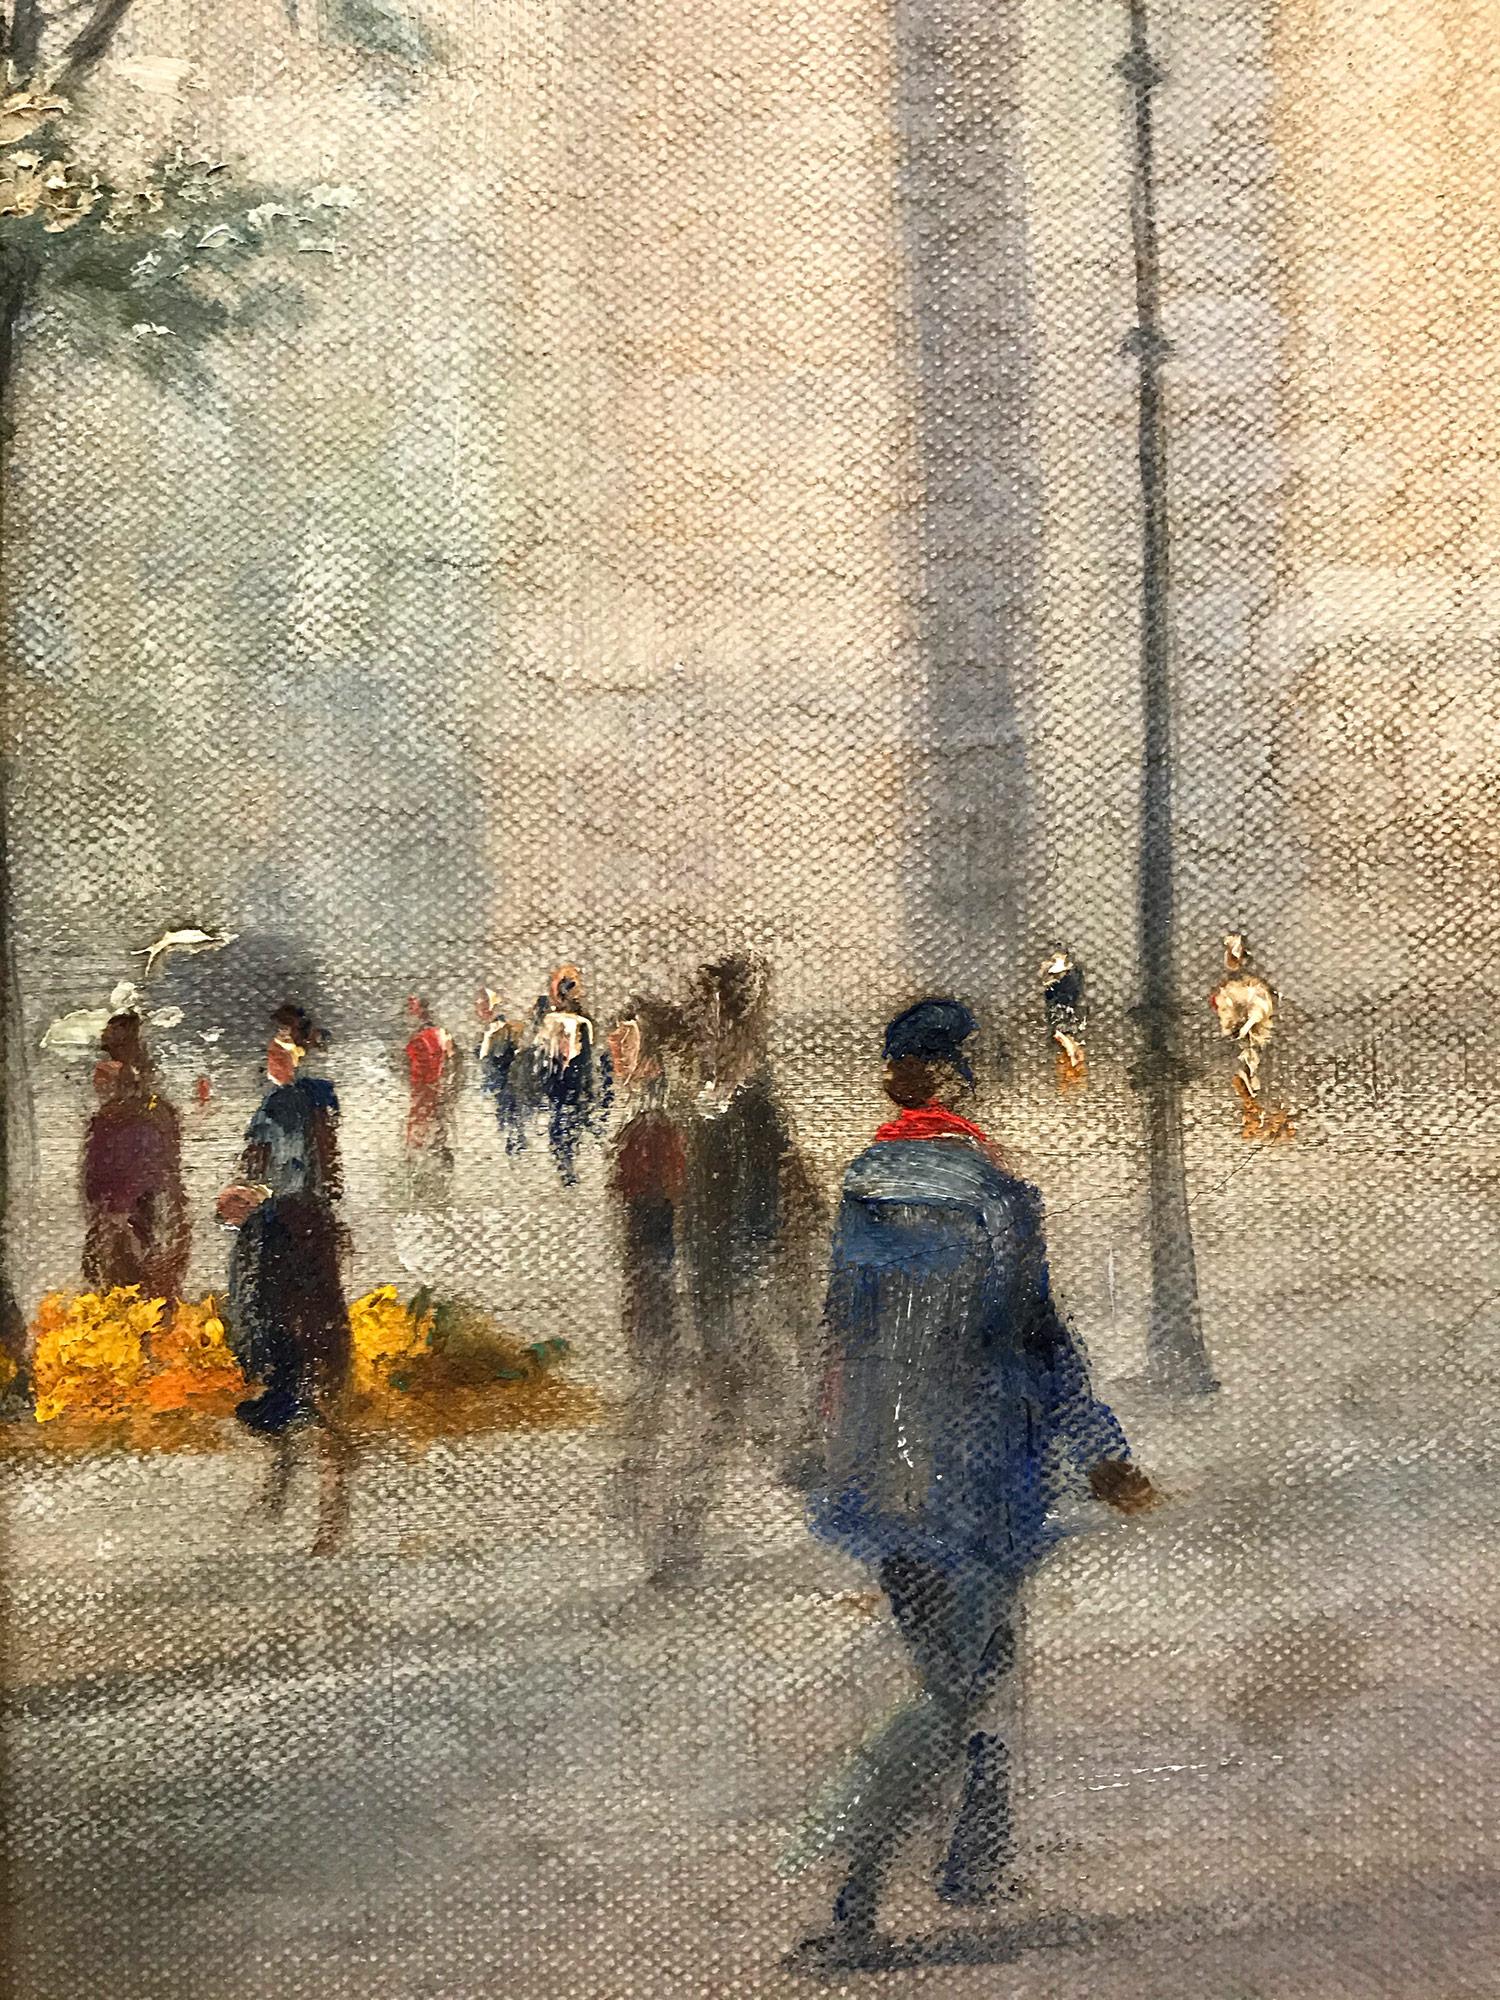 This piece is an exceptional impressionistic cityscape scene by Paul Gagni of 'L'Arc de Triomphe' in Paris. Wth flower vendors along the sidewalk, pedestrians, and cars, we are drawn into this wonderful Parisian scene effortlessly. This Paris scene